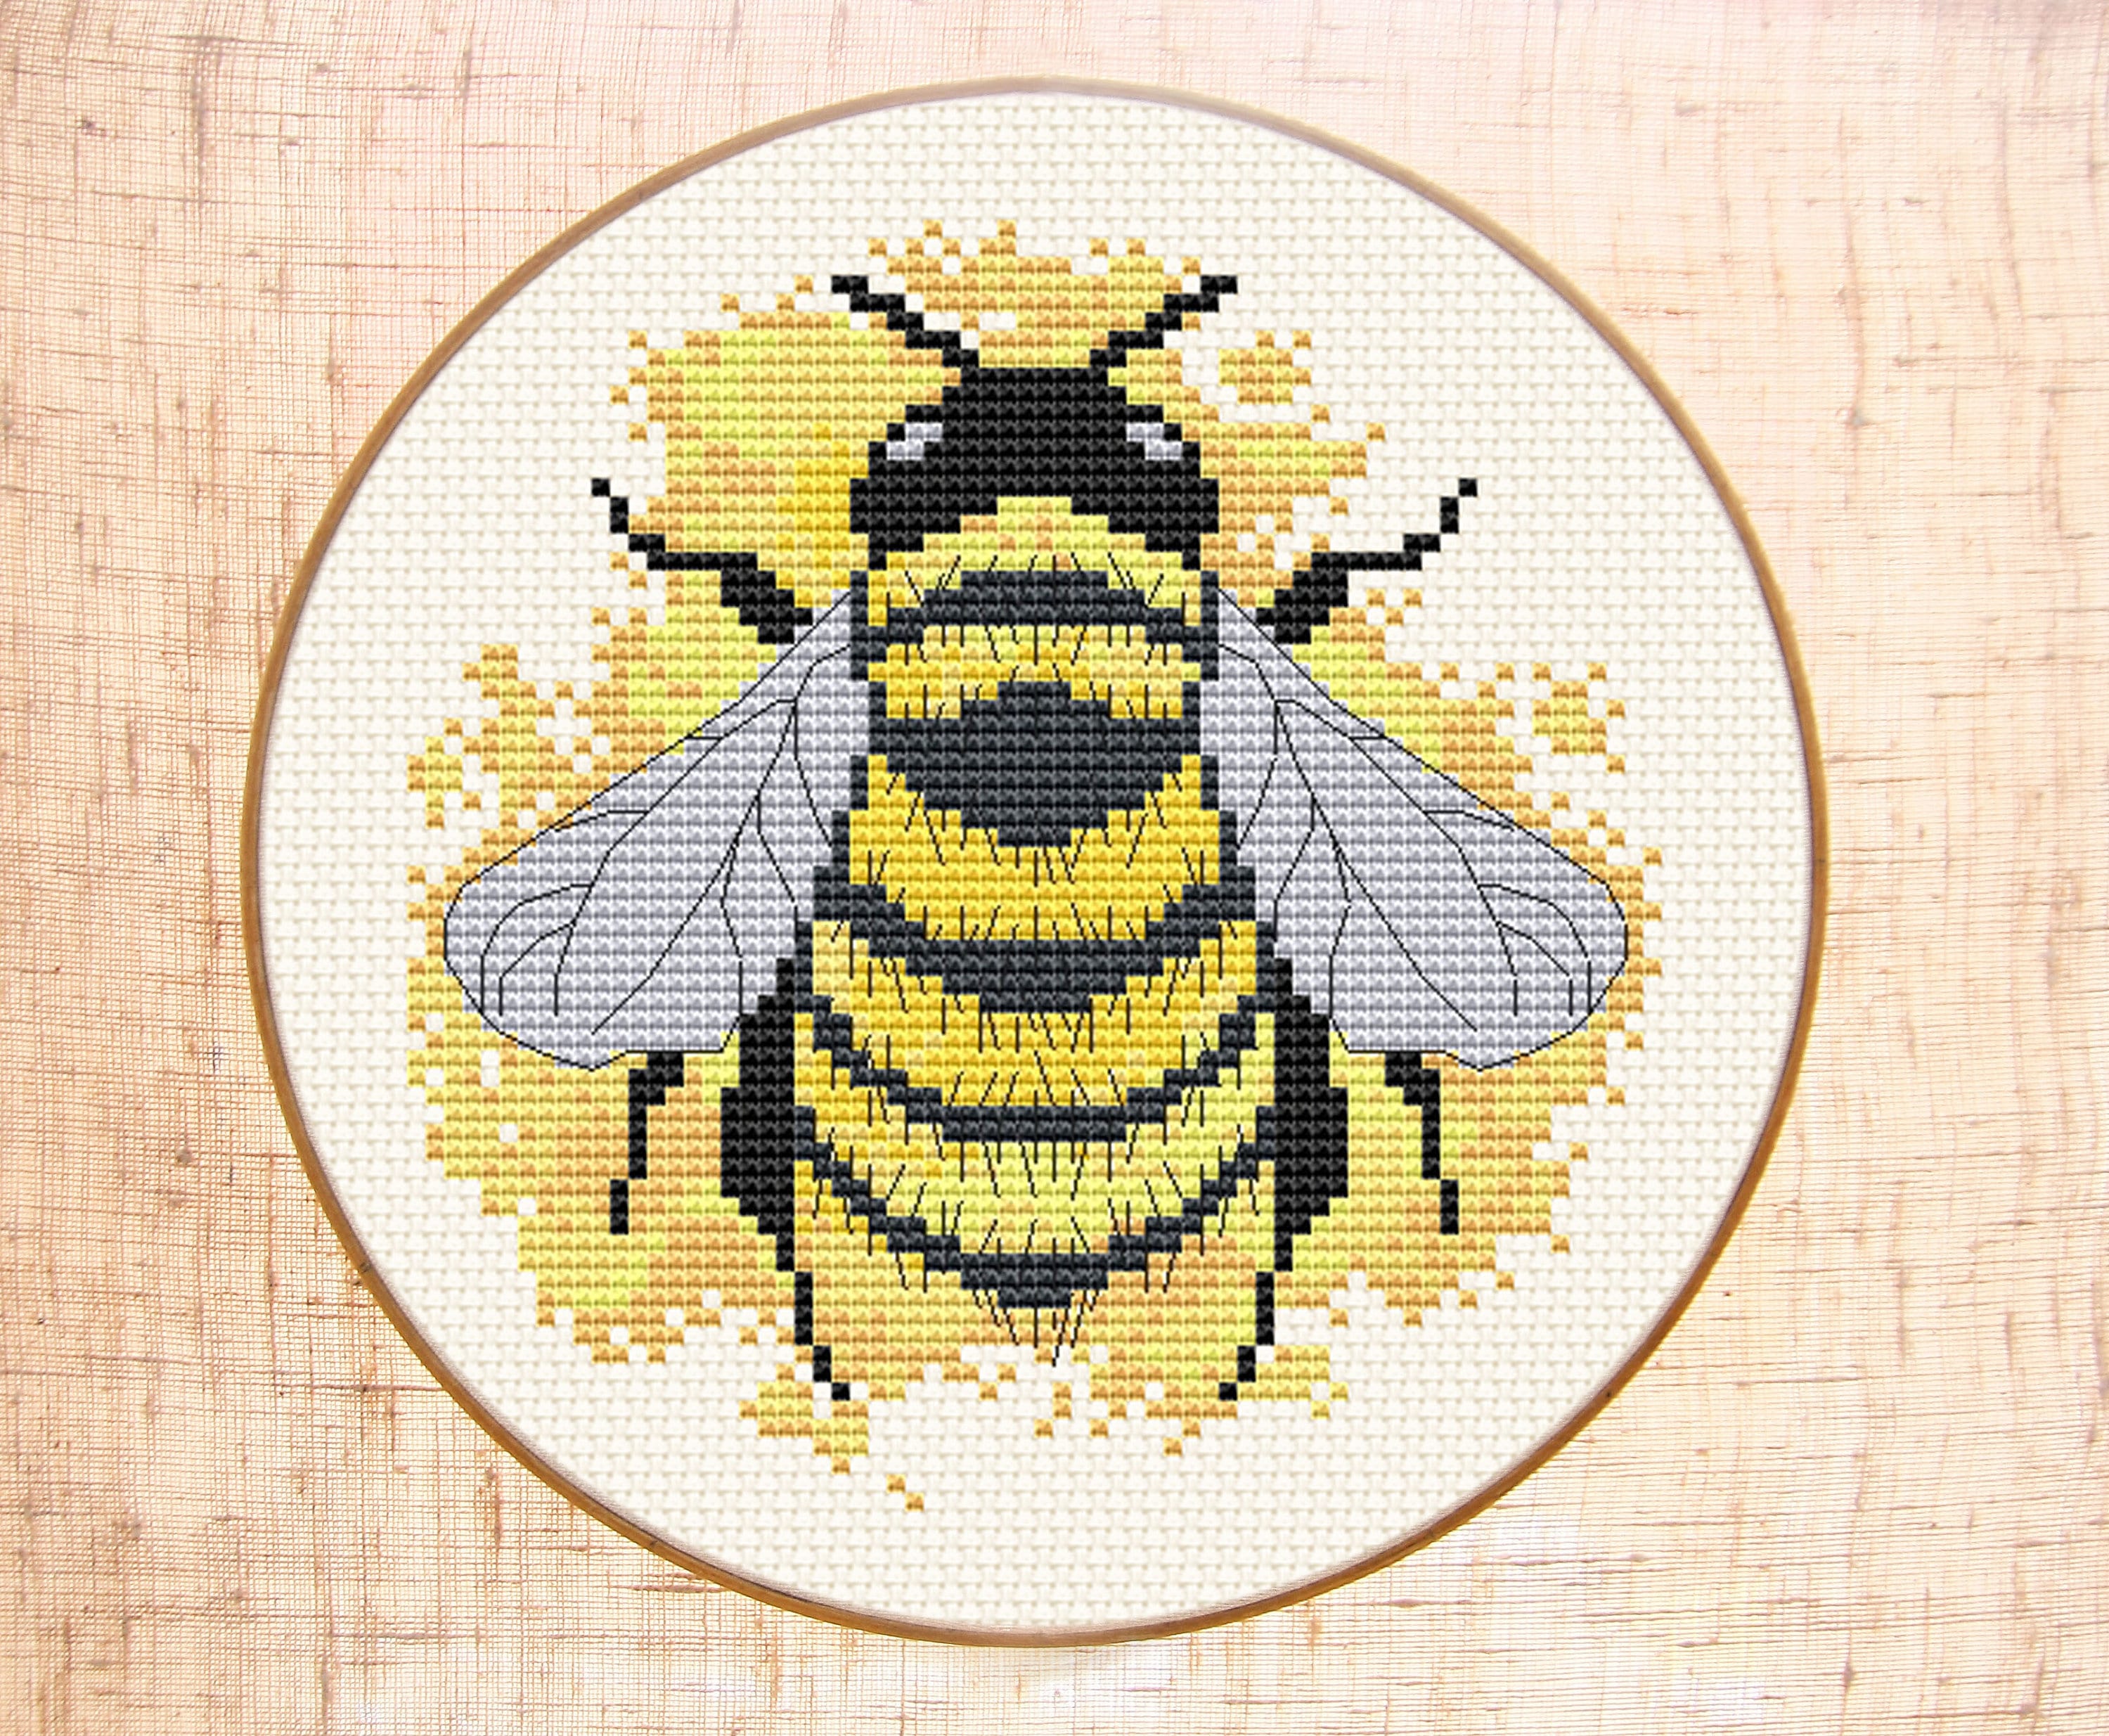 insect-honey-bee-cross-stitch-pattern-digital-pdf-kits-how-to-jewelry-making-beading